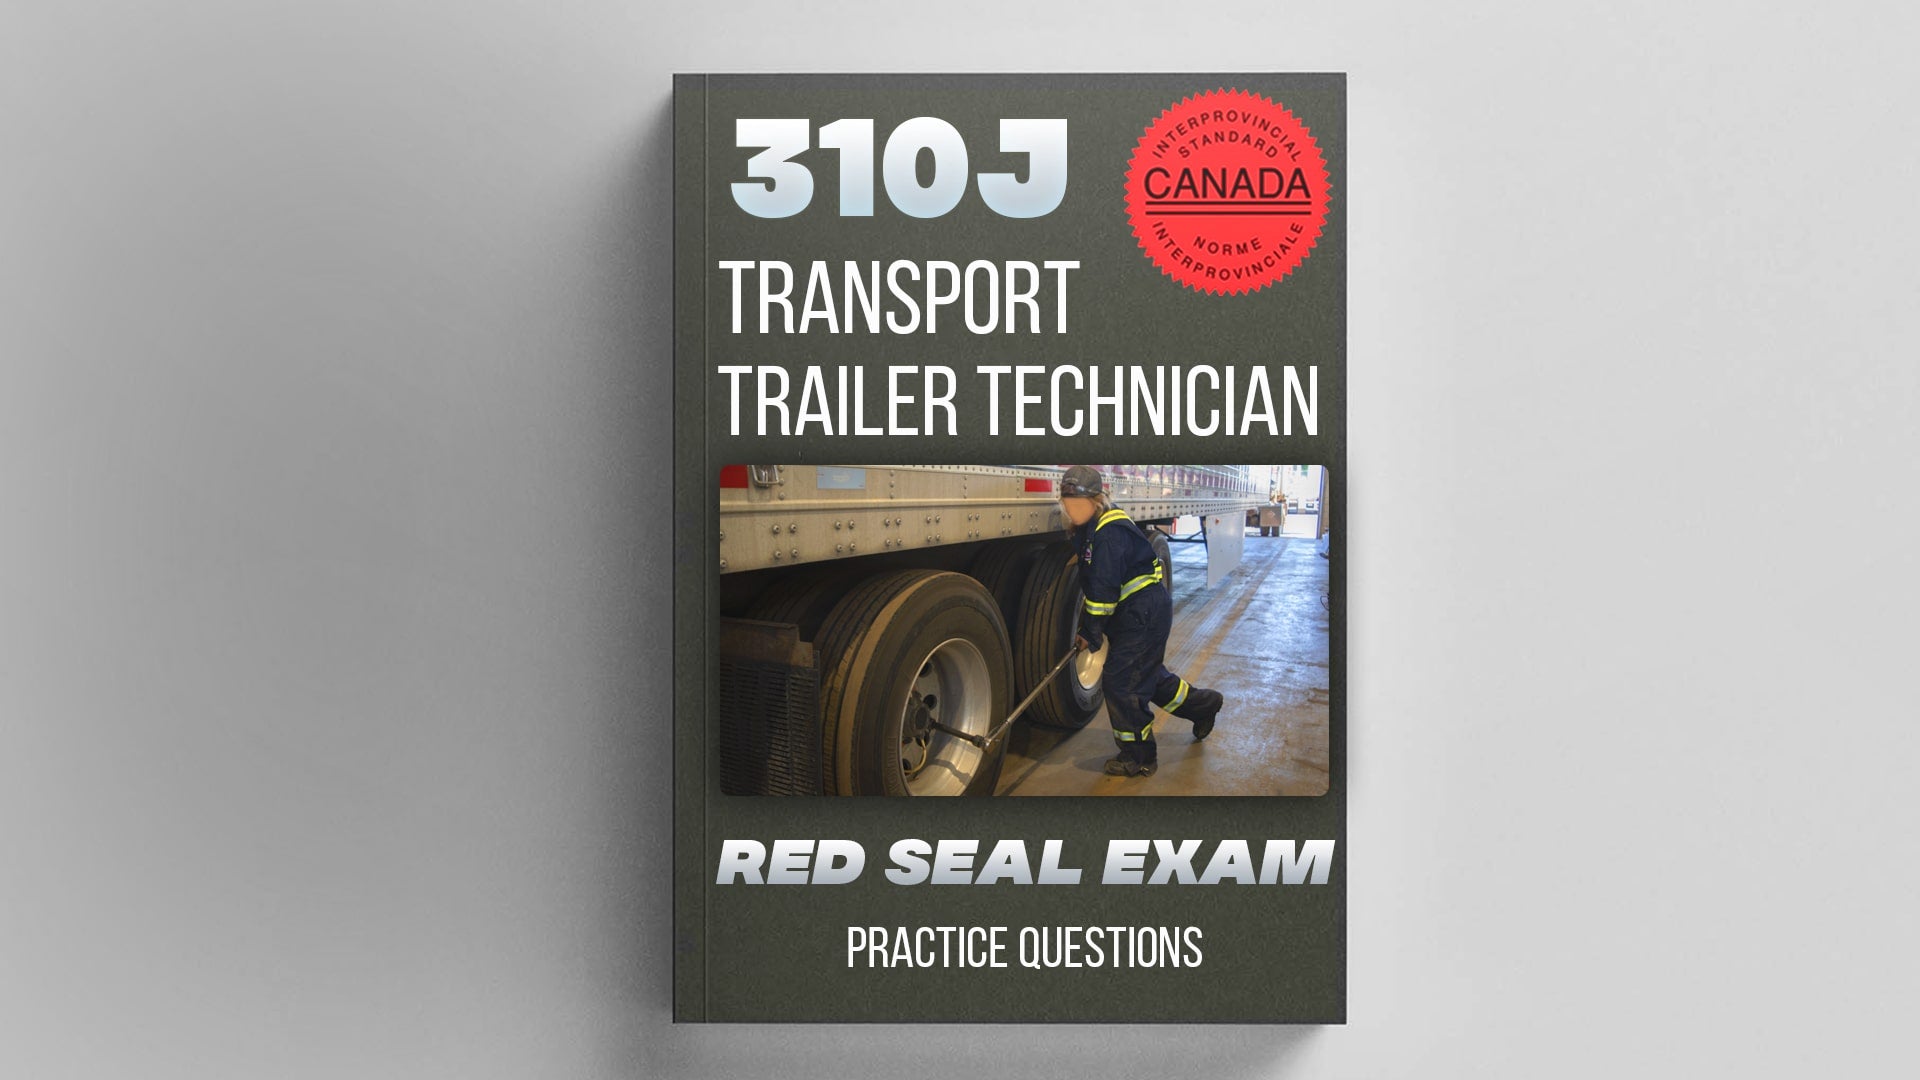 310J Transport Trailer Technician Red Seal Exam Practice Questions